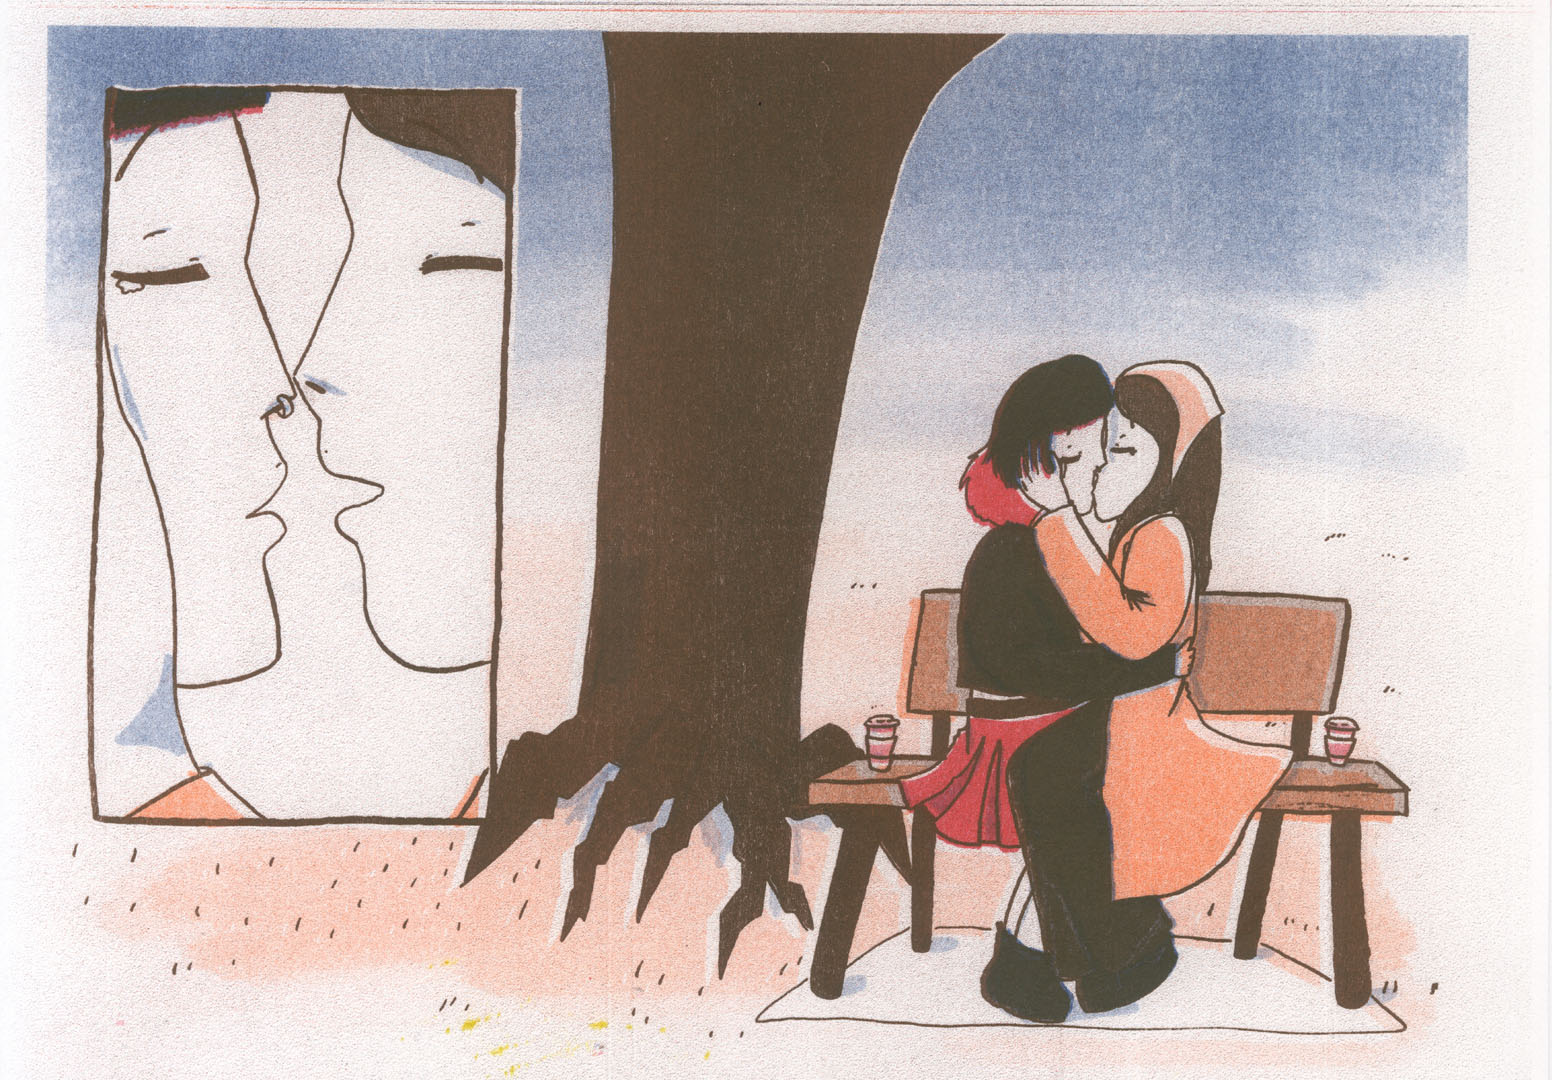 Comic book spread showing two women kissing on bench